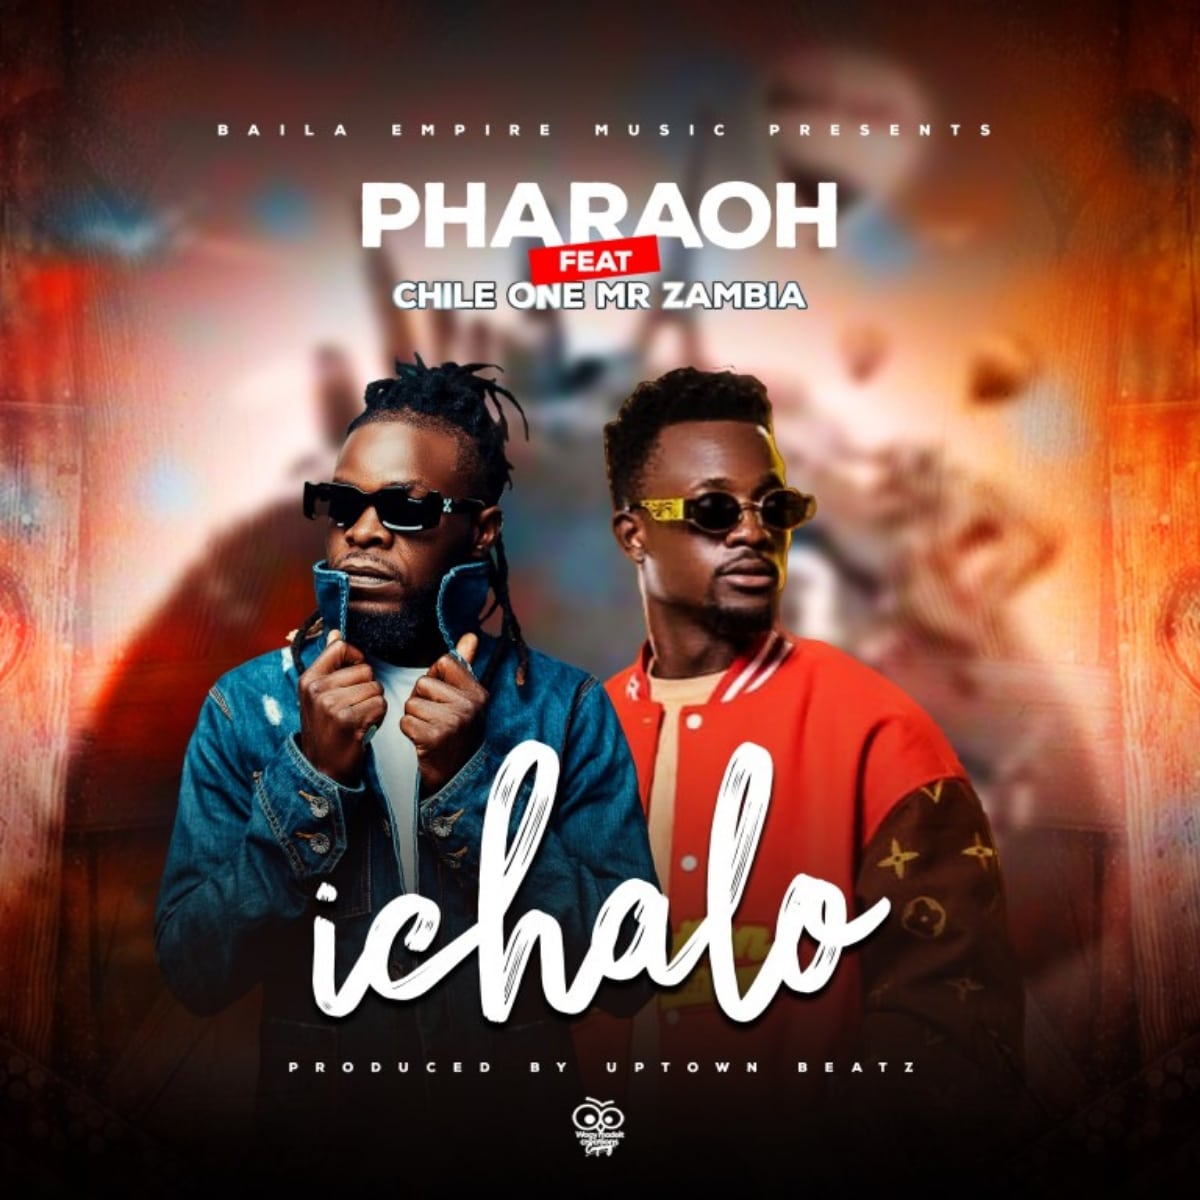 DOWNLOAD: Pharaoh Ft. Chile One Mr Zambia – “Ichalo” Mp3